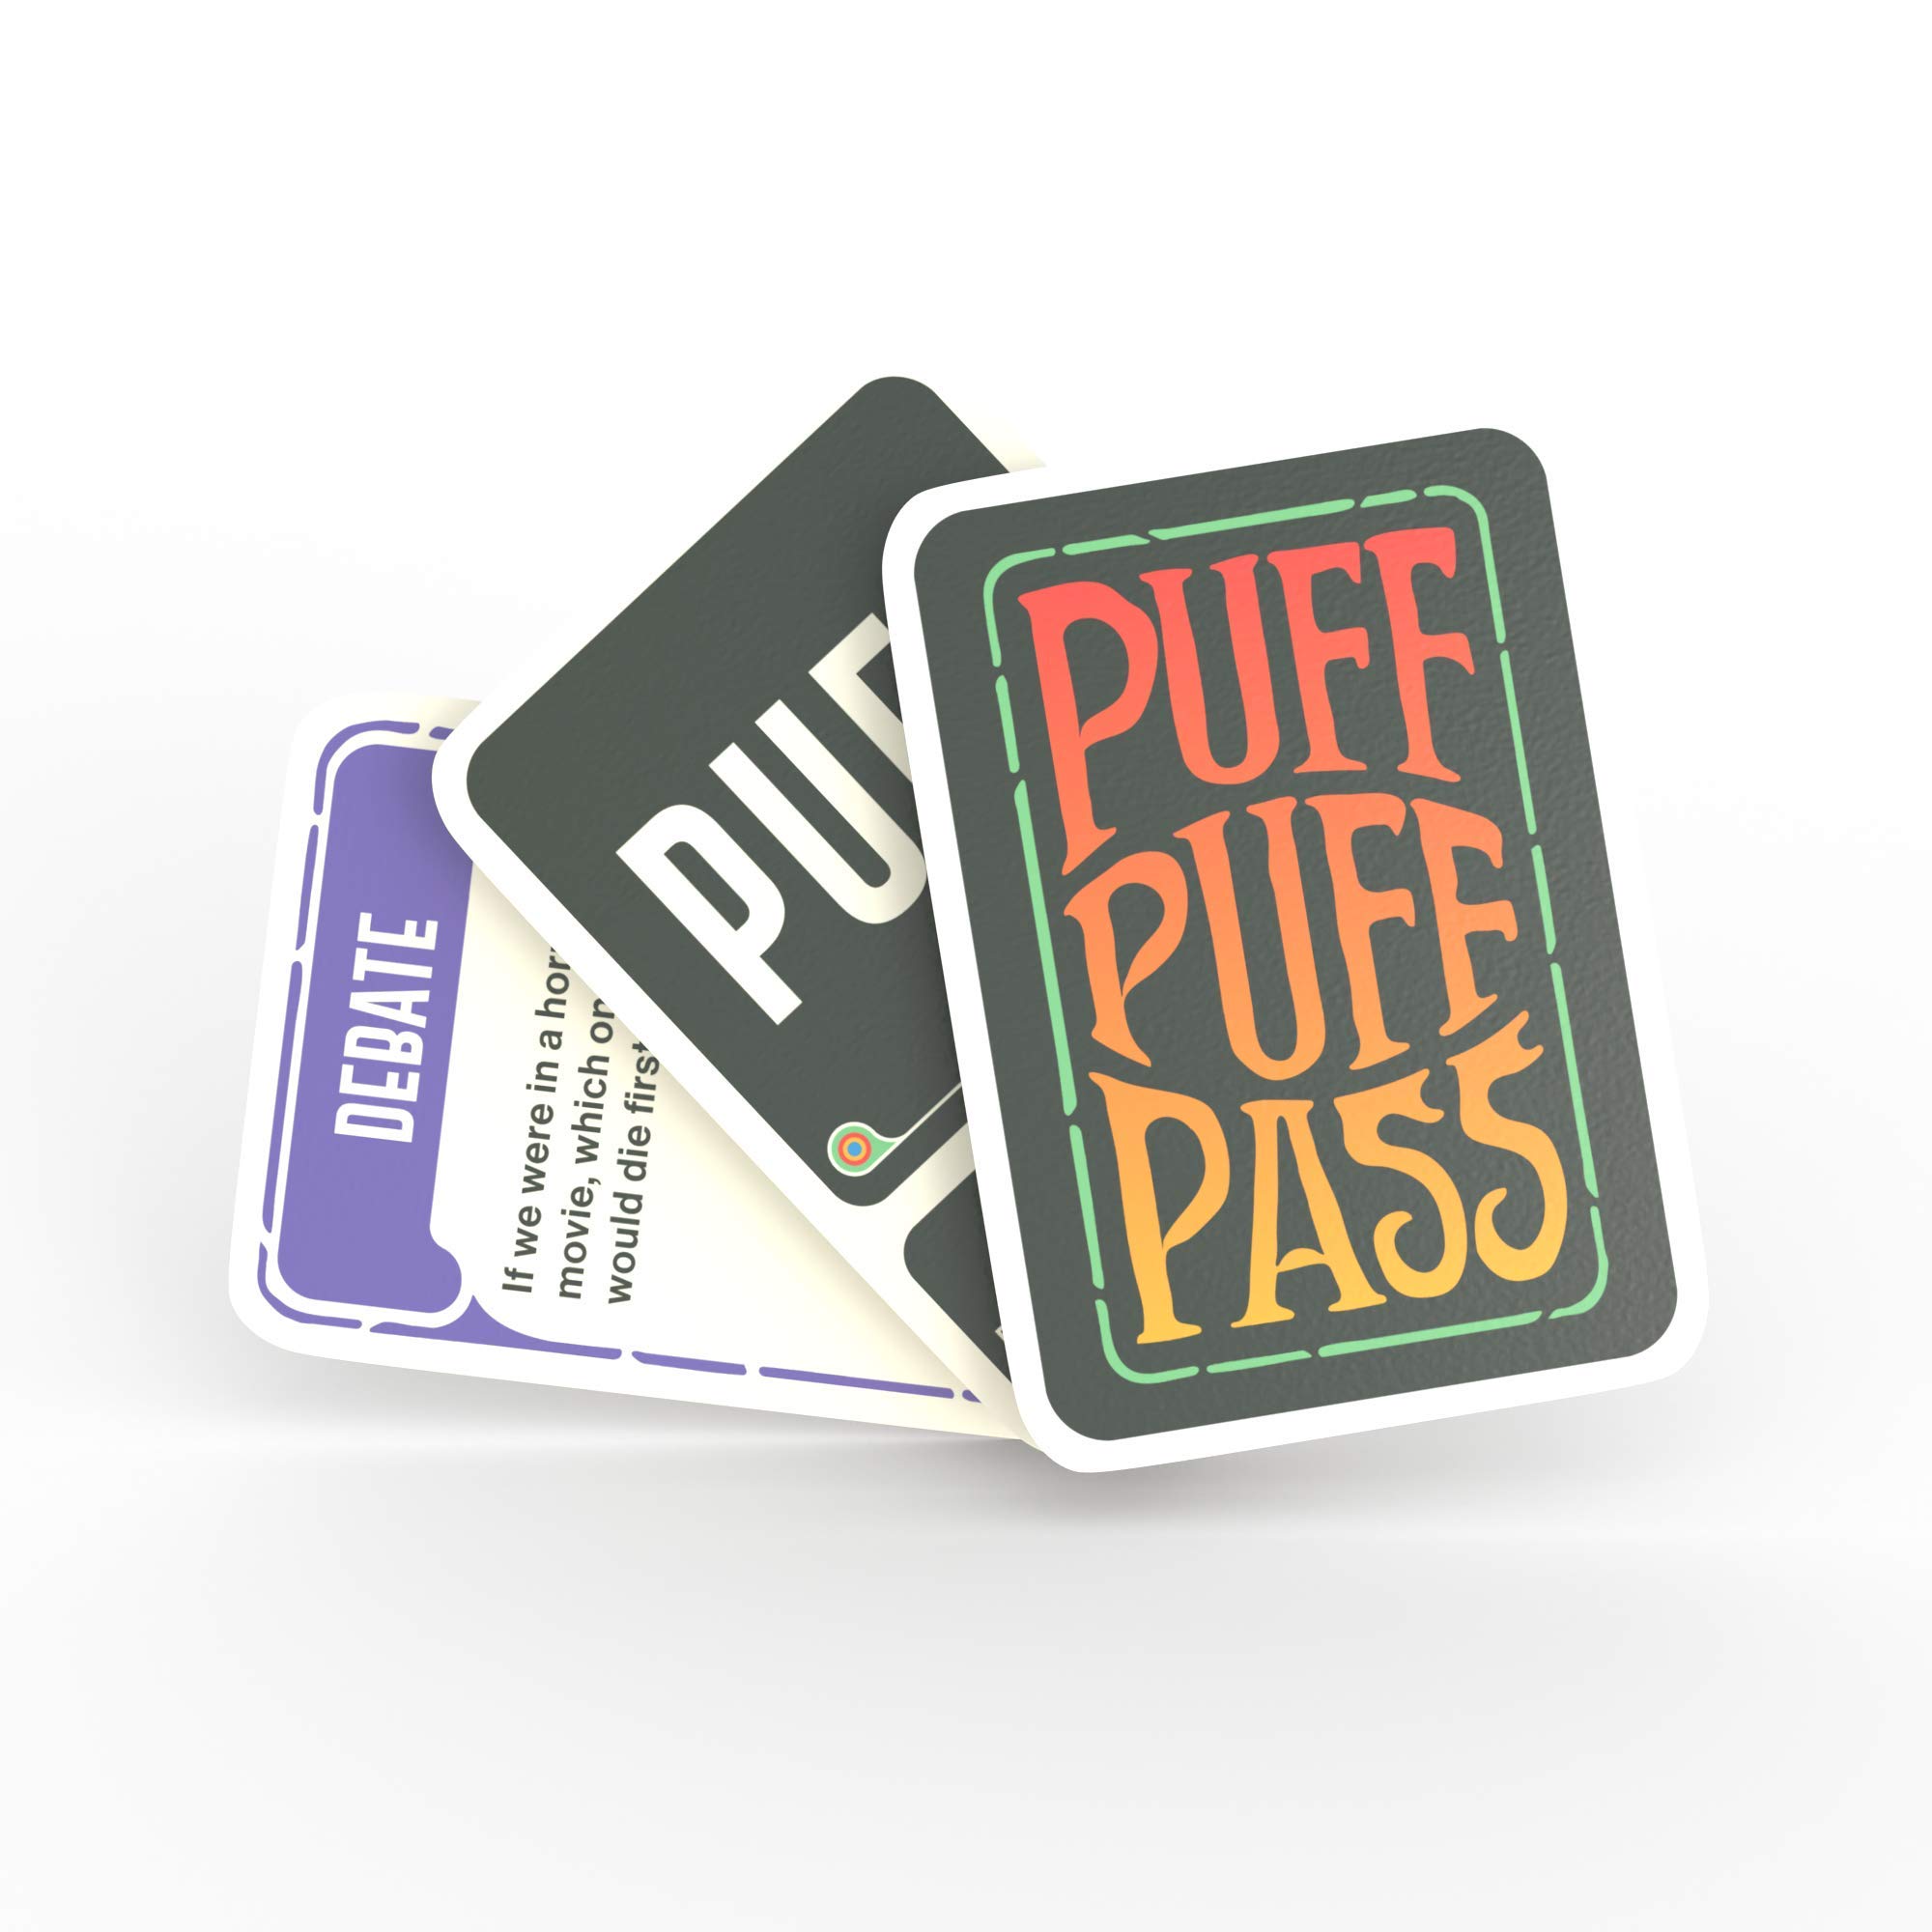 Puff Puff Pass: The Card Game for Stoners w/ 109 Hilarious Trivia, Conversation Starters, Would You Rathers, and More.